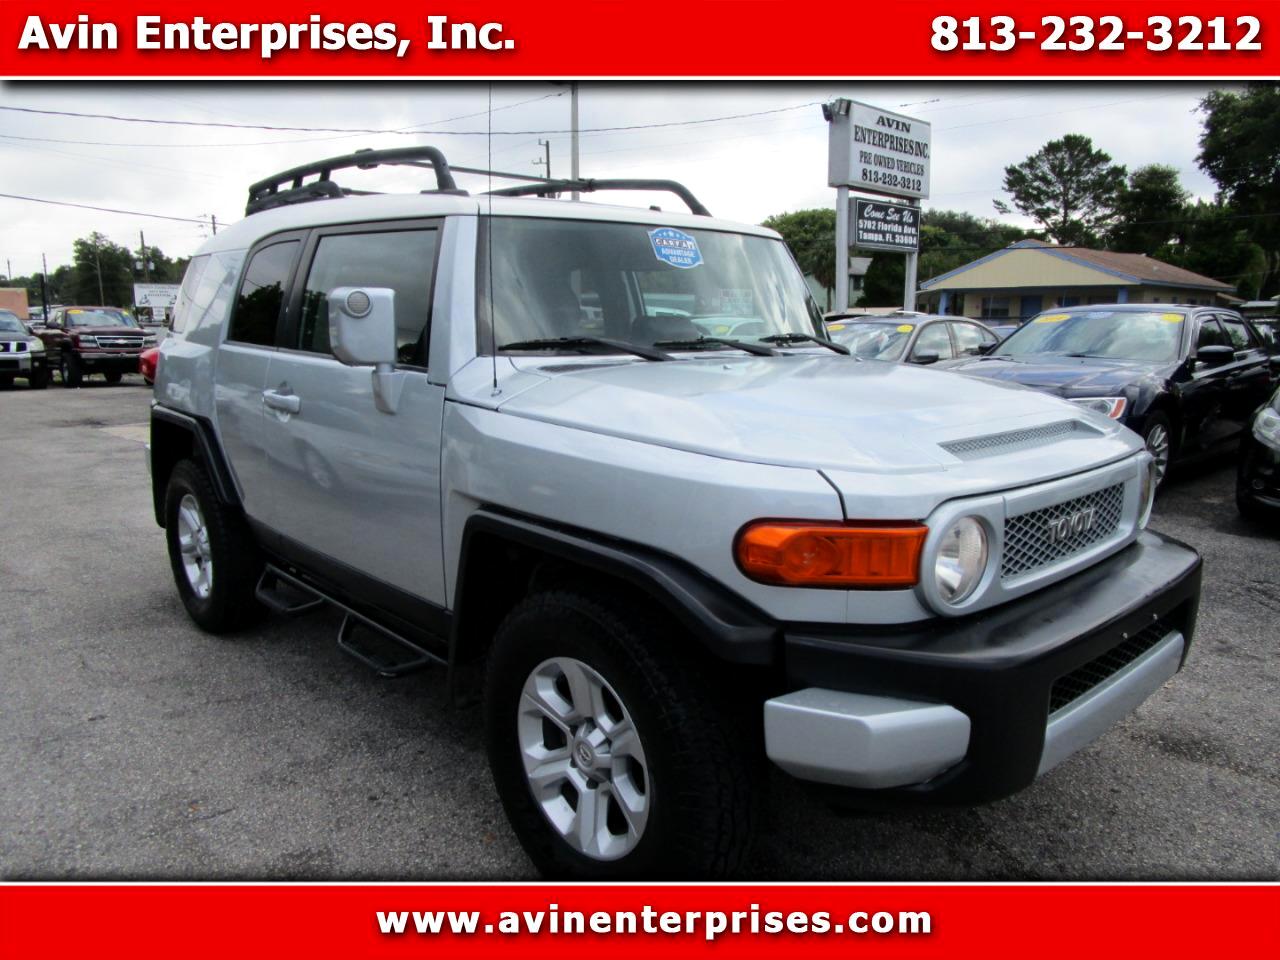 Used 2007 Toyota Fj Cruiser 4wd At For Sale In Tampa Fl 33604 Avin